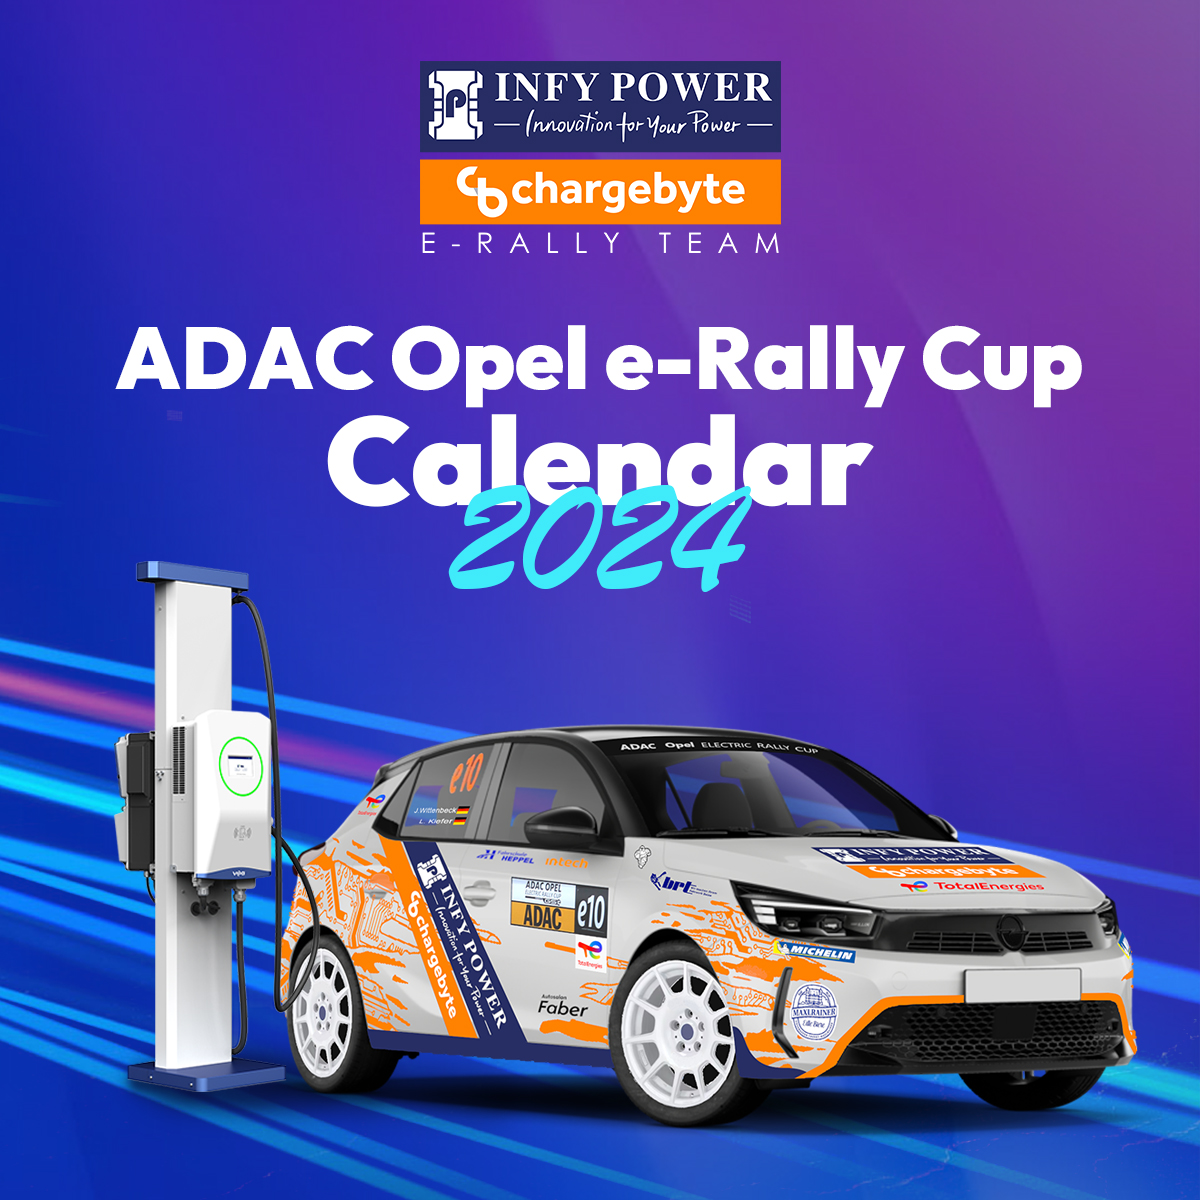 Infypower is joining chargebyte for the 2024 ADAC Opel Electric Rally Cup Season